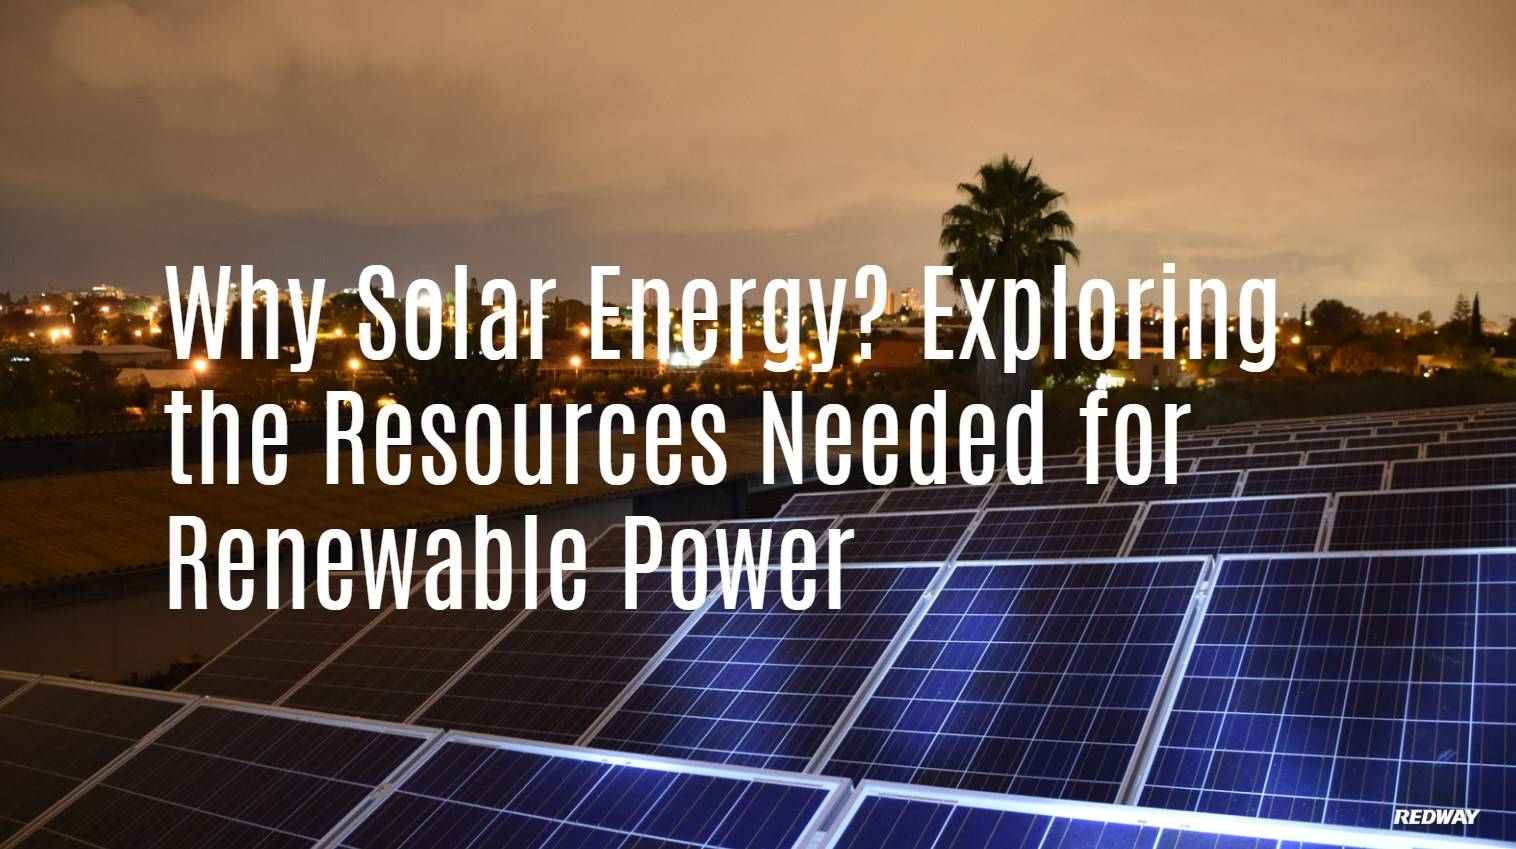 Why Solar Energy? Exploring the Resources Needed for Renewable Power. redway, the Middle East ESS Battery